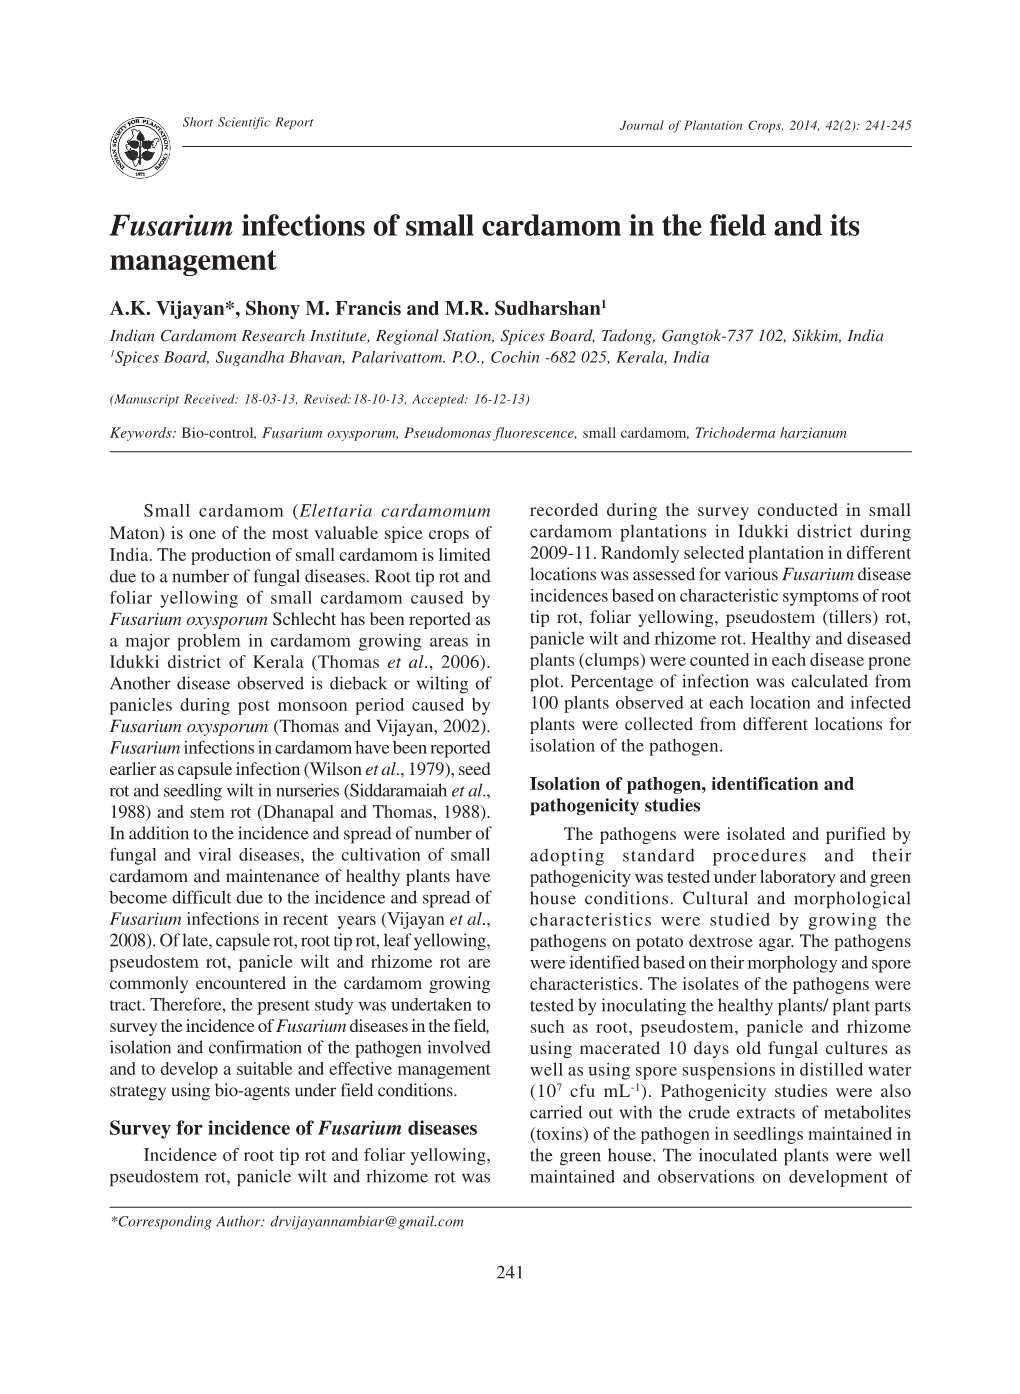 Fusarium Infections of Small Cardamom in the Field and Its Management